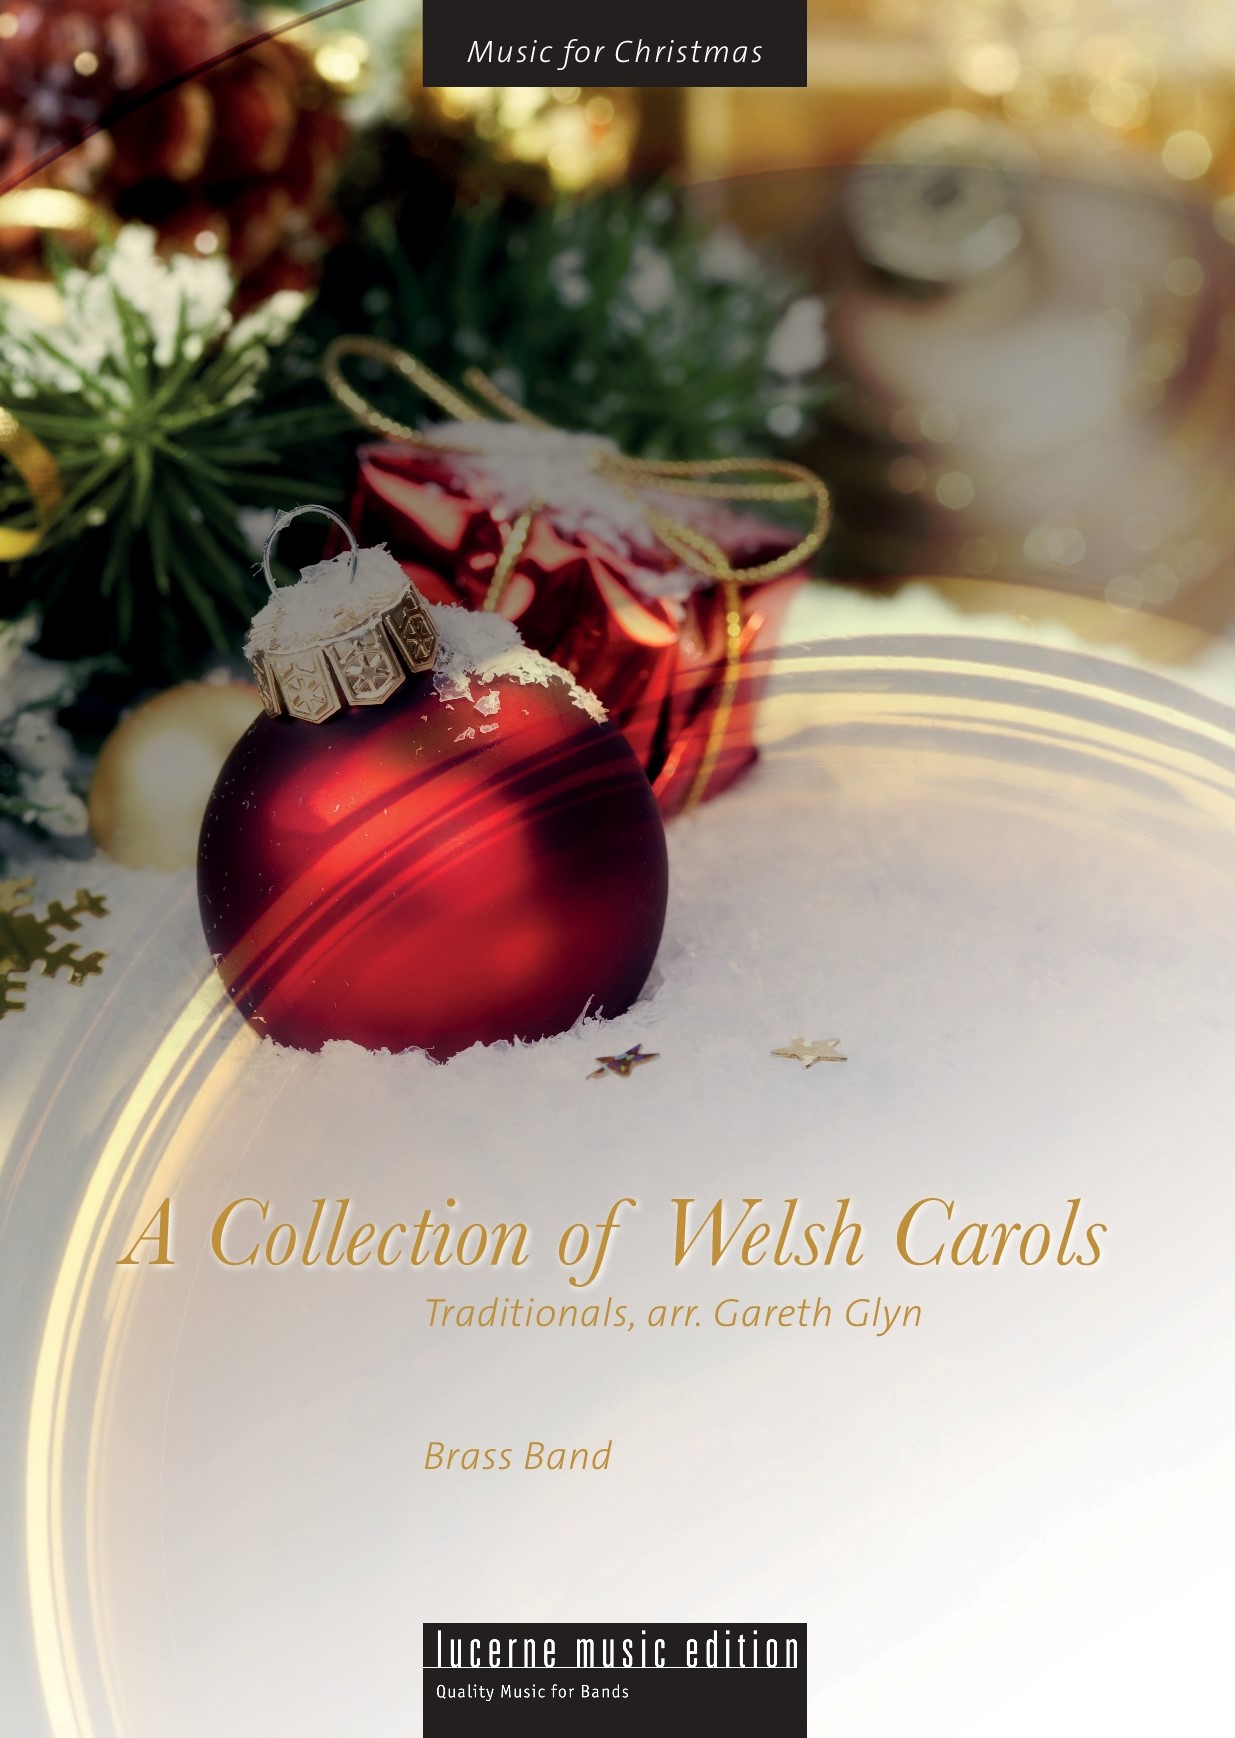 A Collection of Welsh Carols